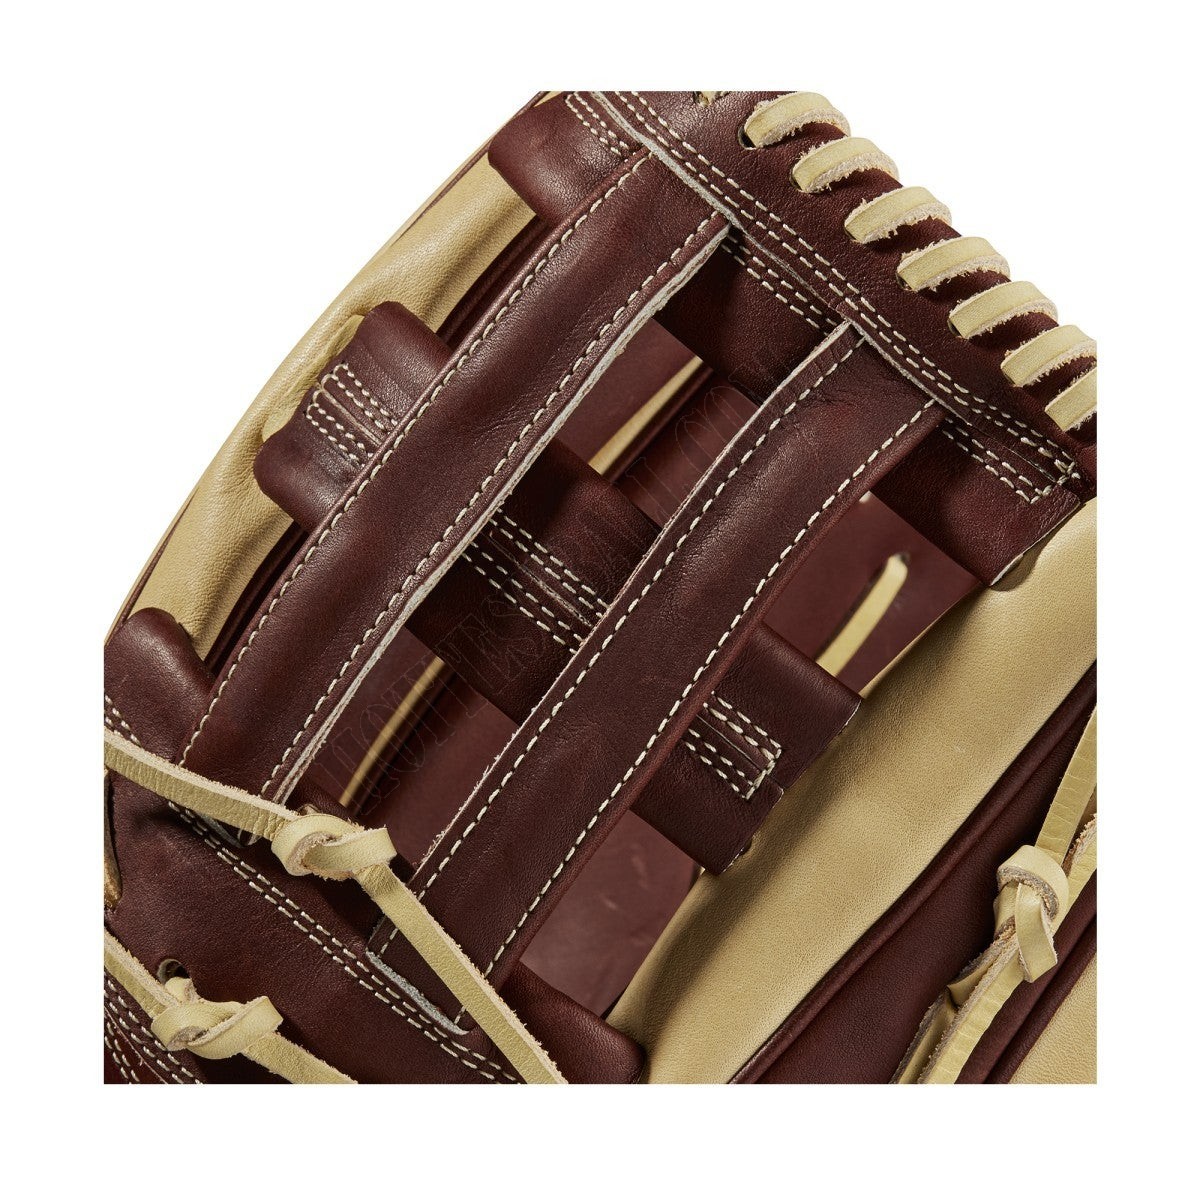 2021 A2000 1799 12.75" Outfield Baseball Glove ● Wilson Promotions - -5